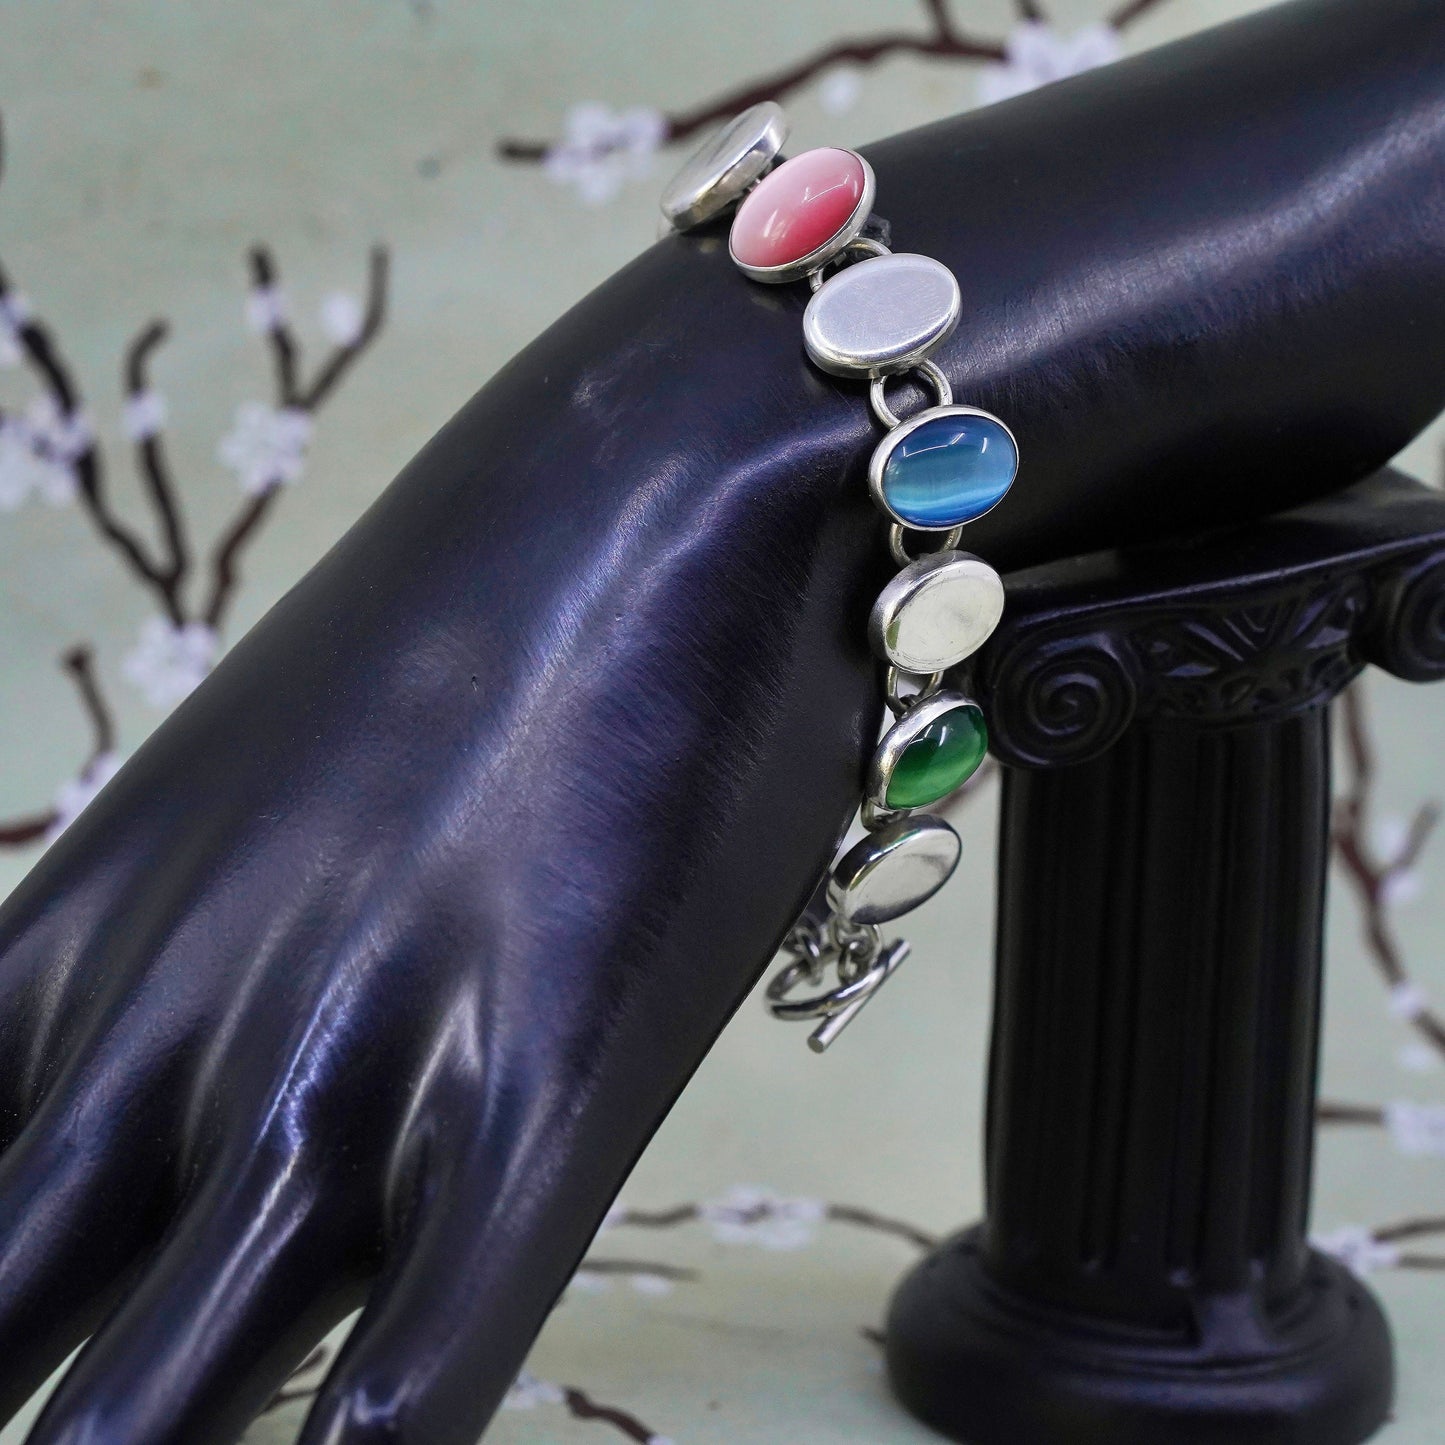 7", Mexican 925 sterling silver bracelet with colorful cats eye toggle closure